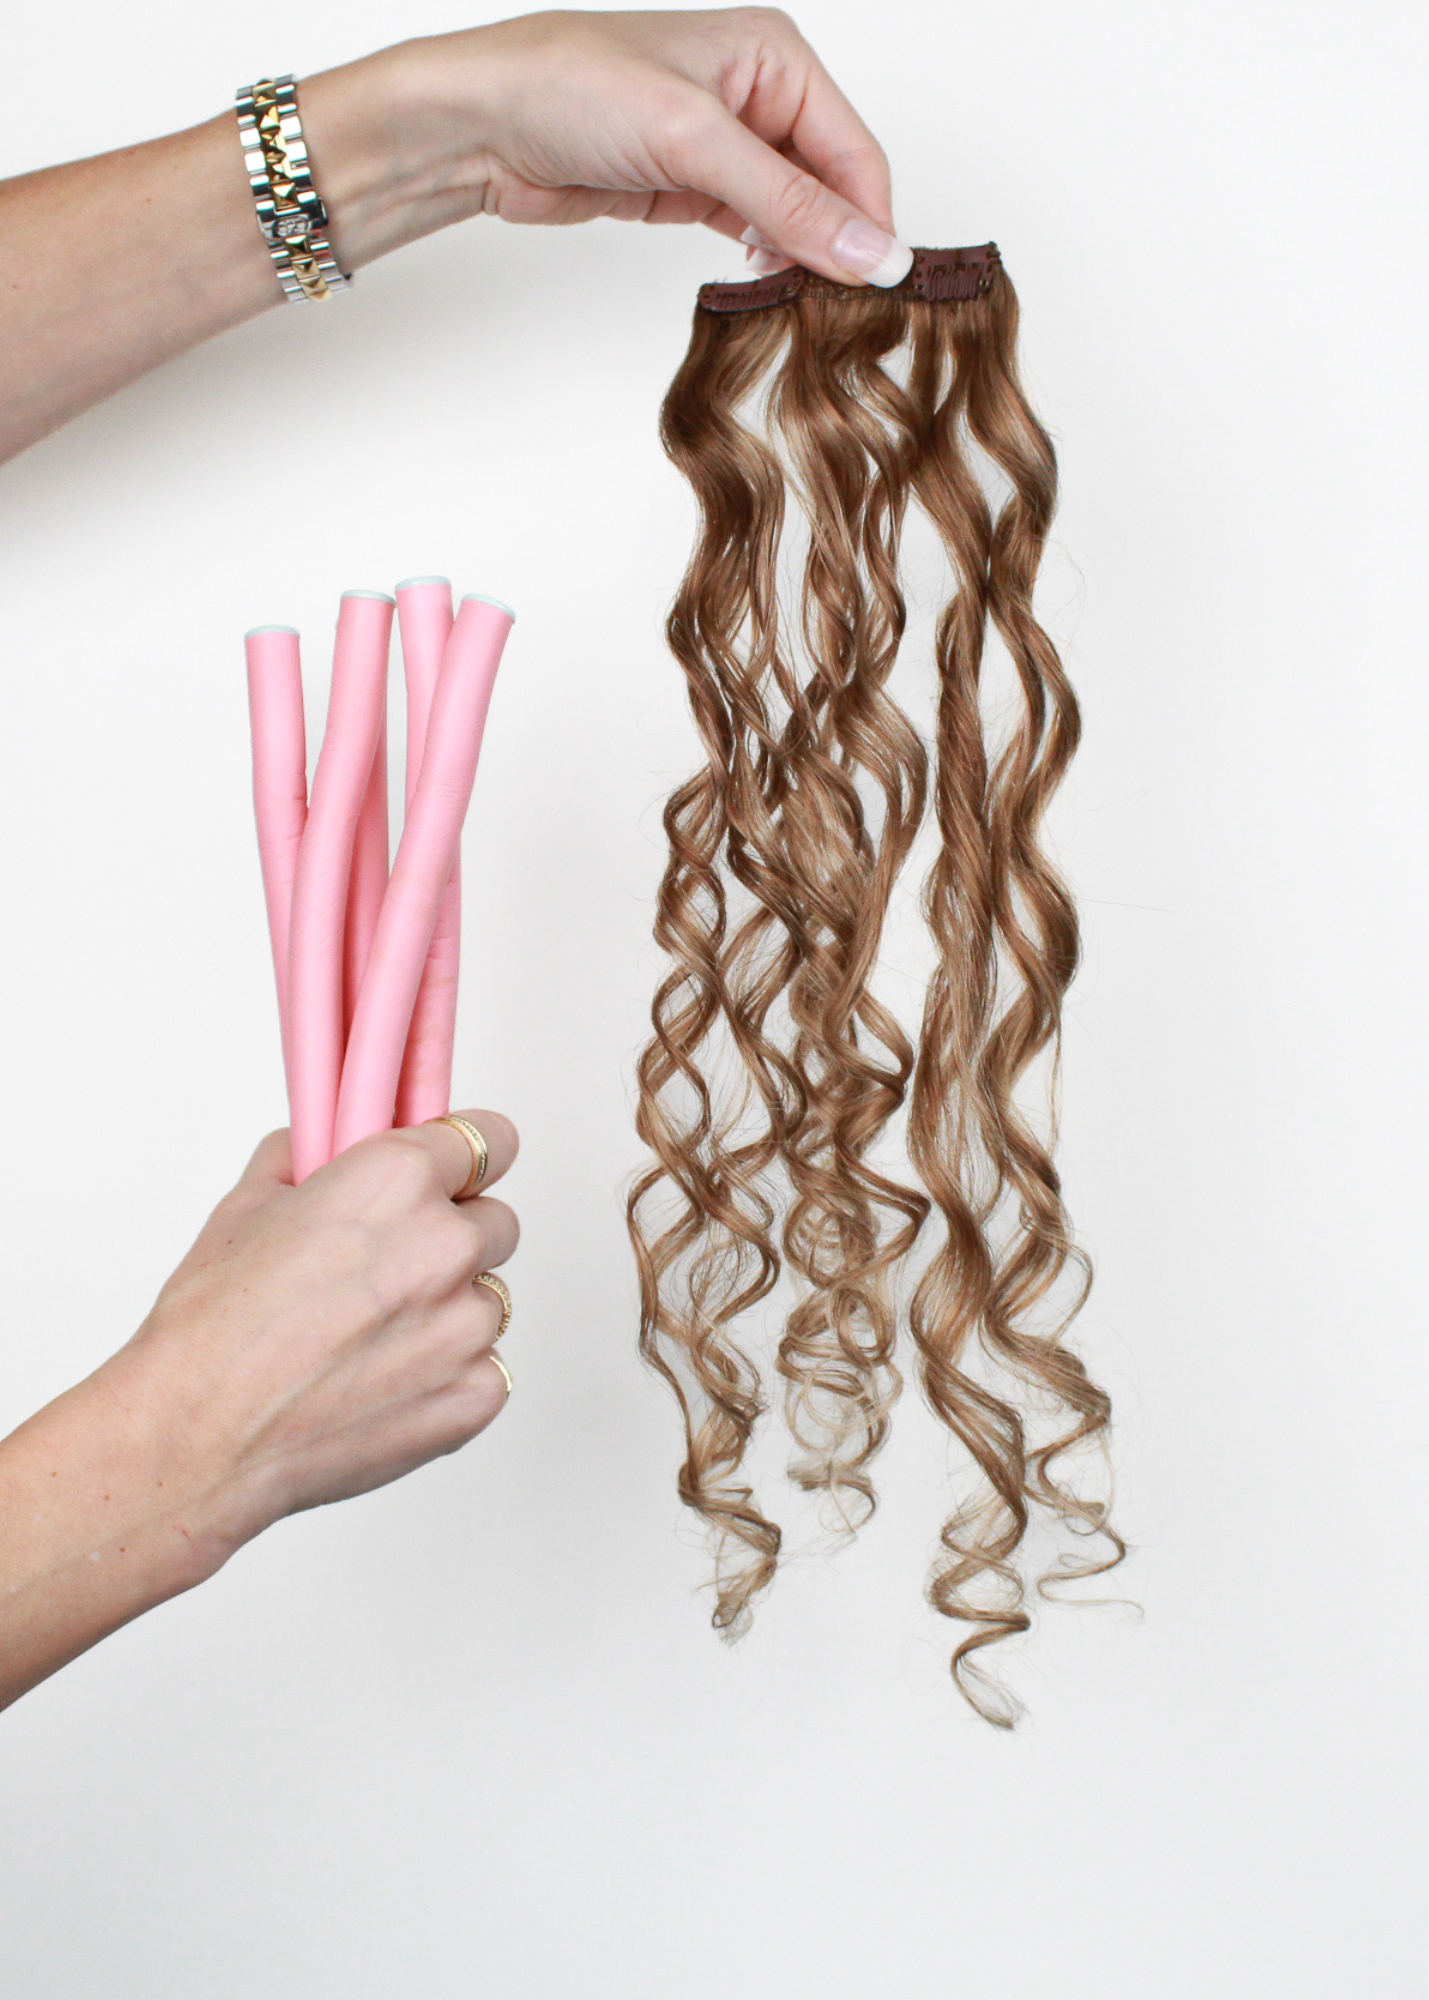 heatless curling rods on cashmere hair clip-in extensions